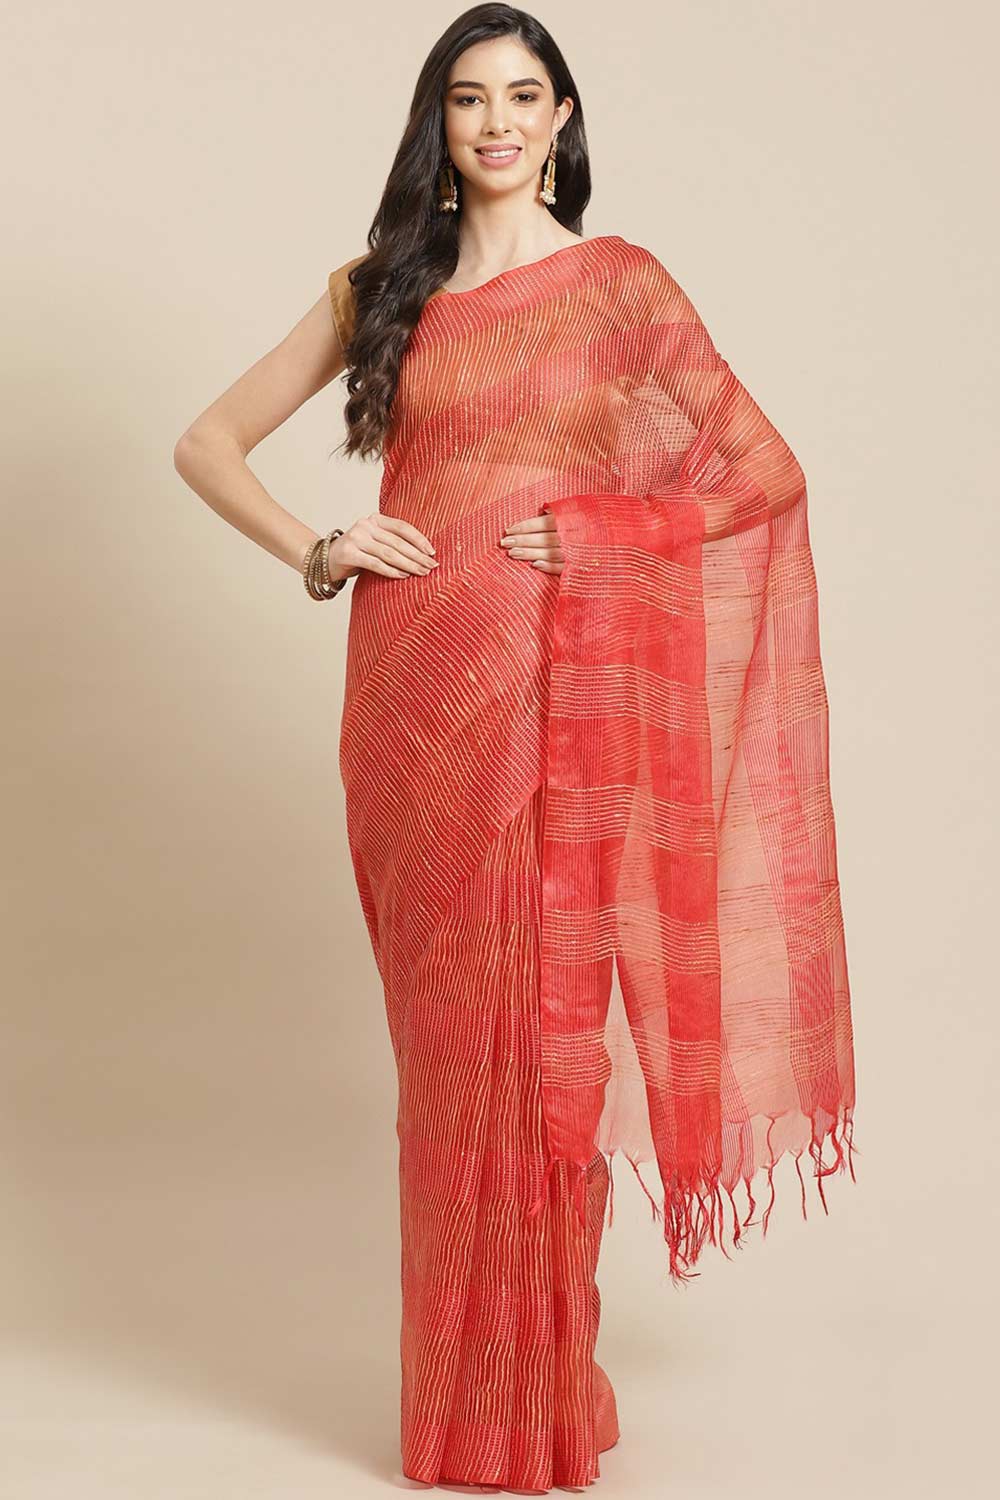 Buy Hillary Red Woven Art Silk One Minute Saree Online - One Minute Saree